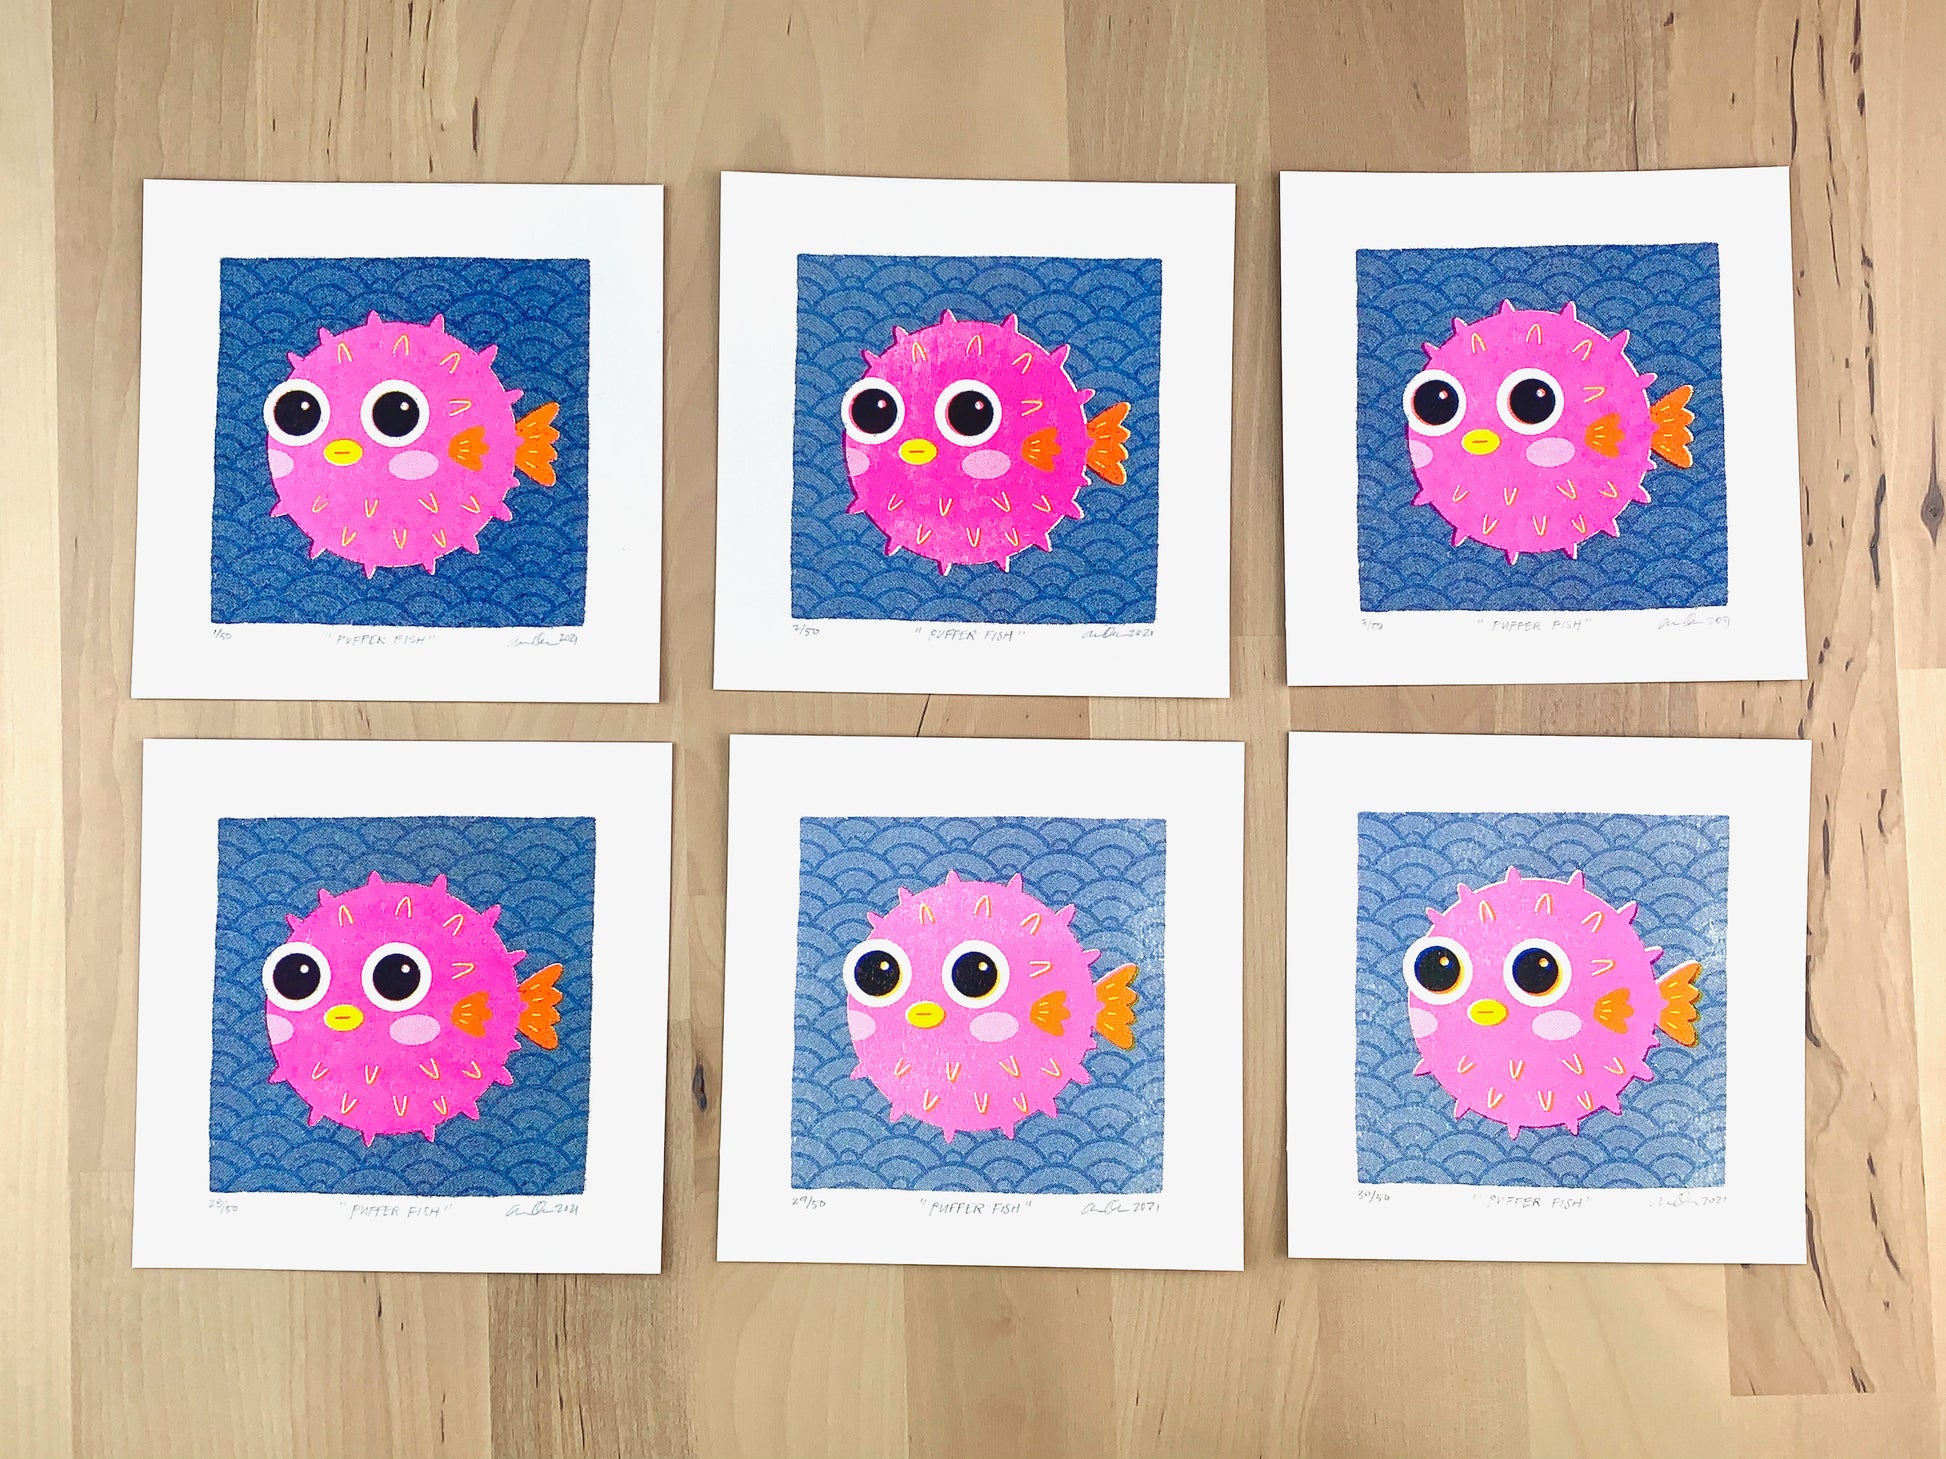 Six Risograph prints of a cute pink pufferfish illustration on a wave pattern background showing the unique variations.